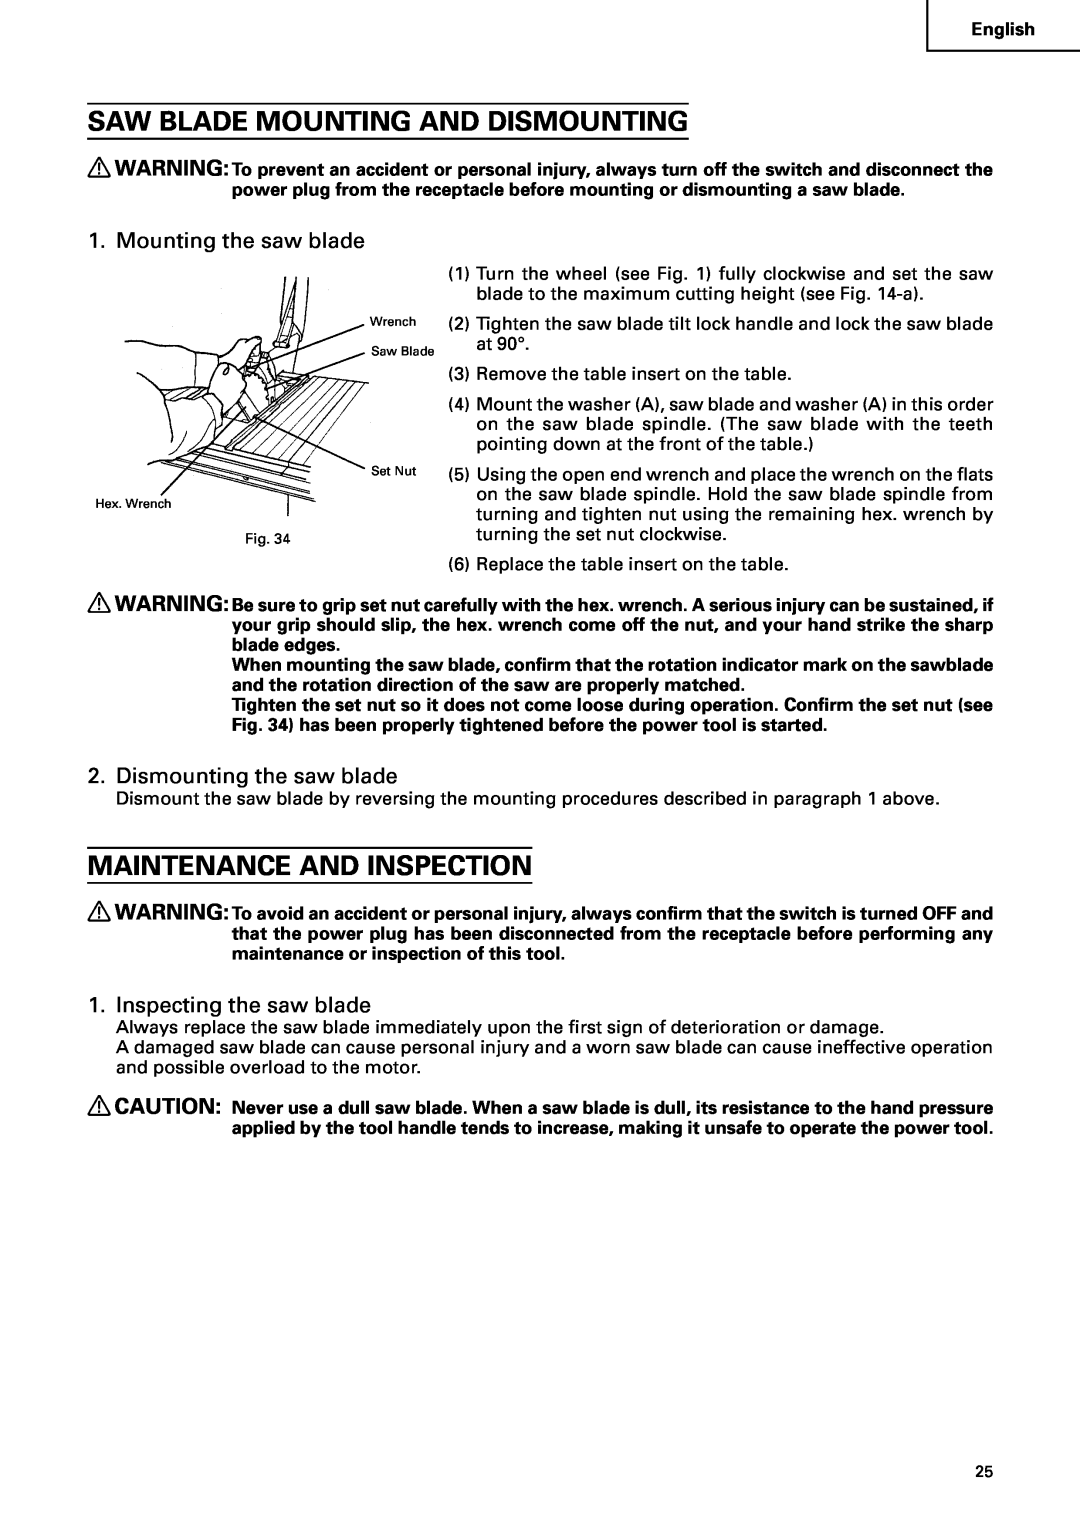 Hitachi C10RA2 instruction manual Saw Blade Mounting And Dismounting, Maintenance And Inspection, Mounting the saw blade 